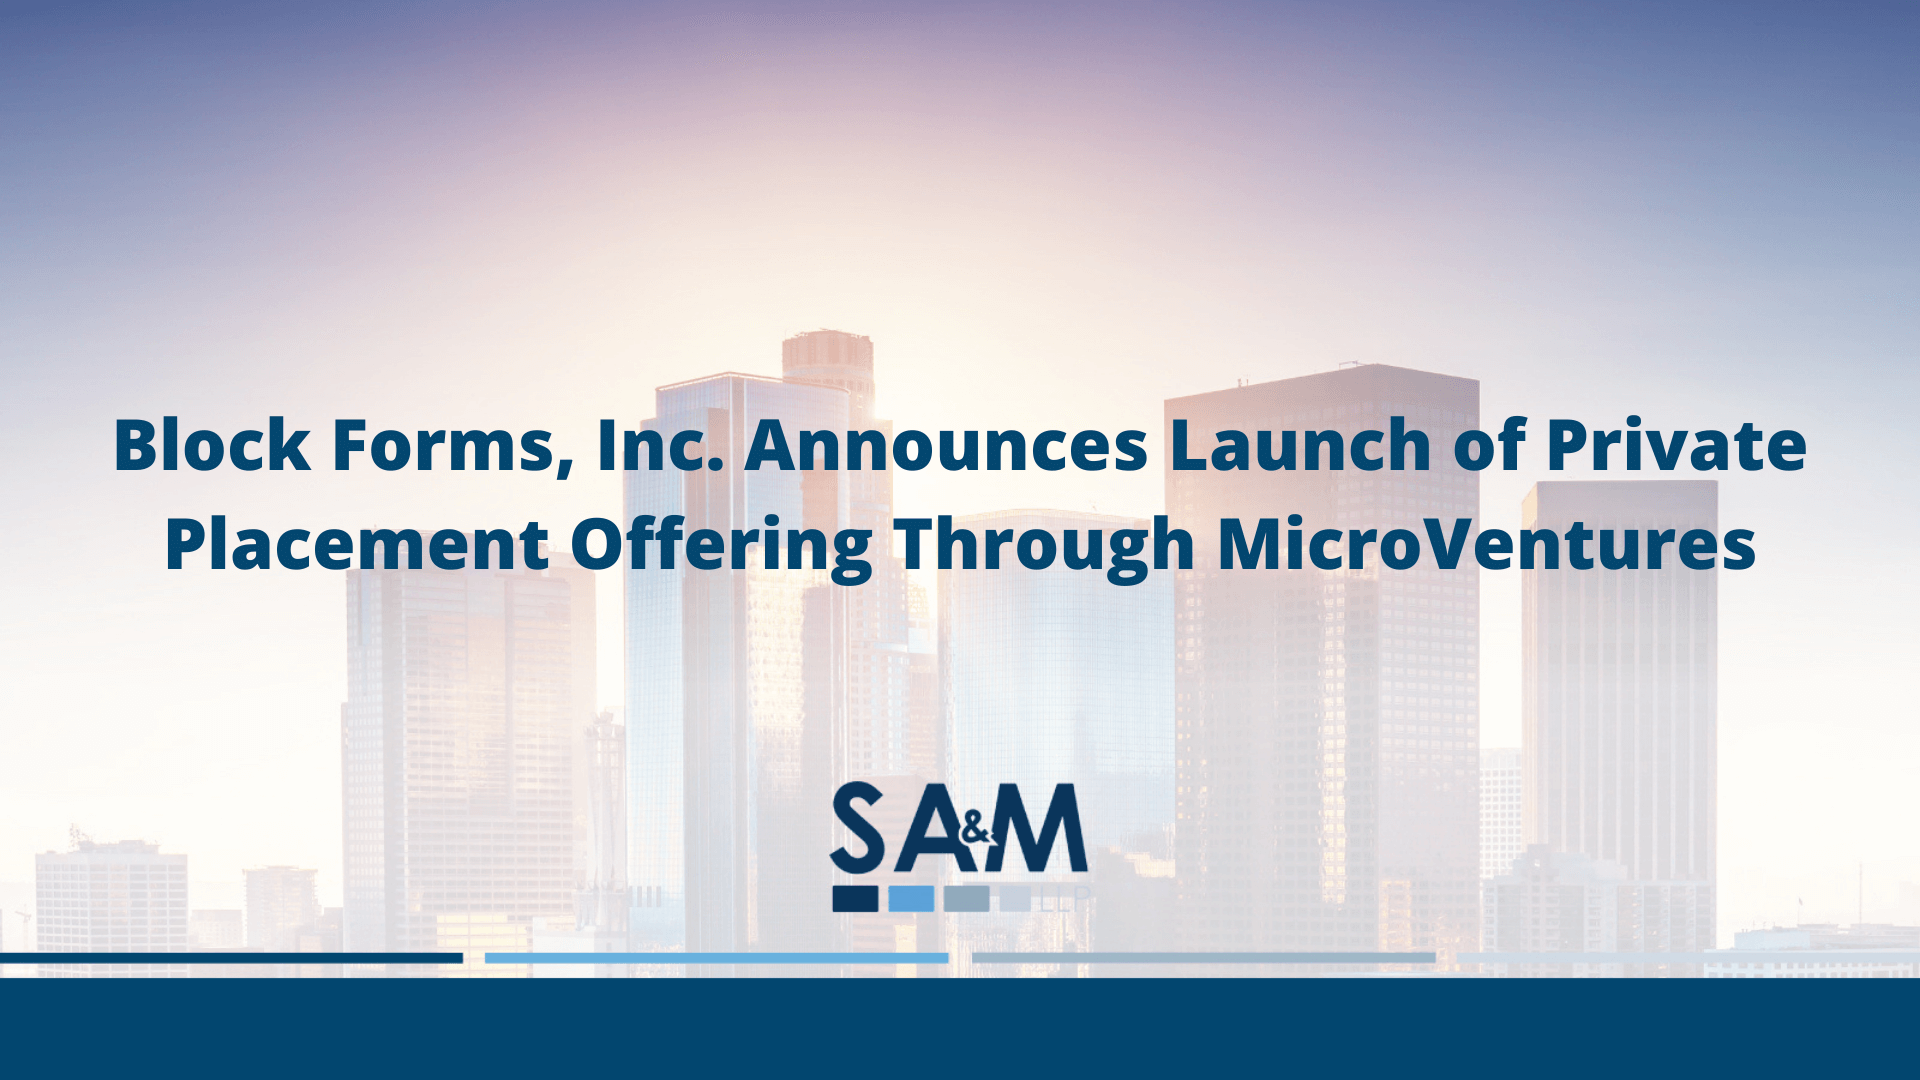 Block Forms, Inc. Announces Launch of Private Placement Offering Through MicroVentures